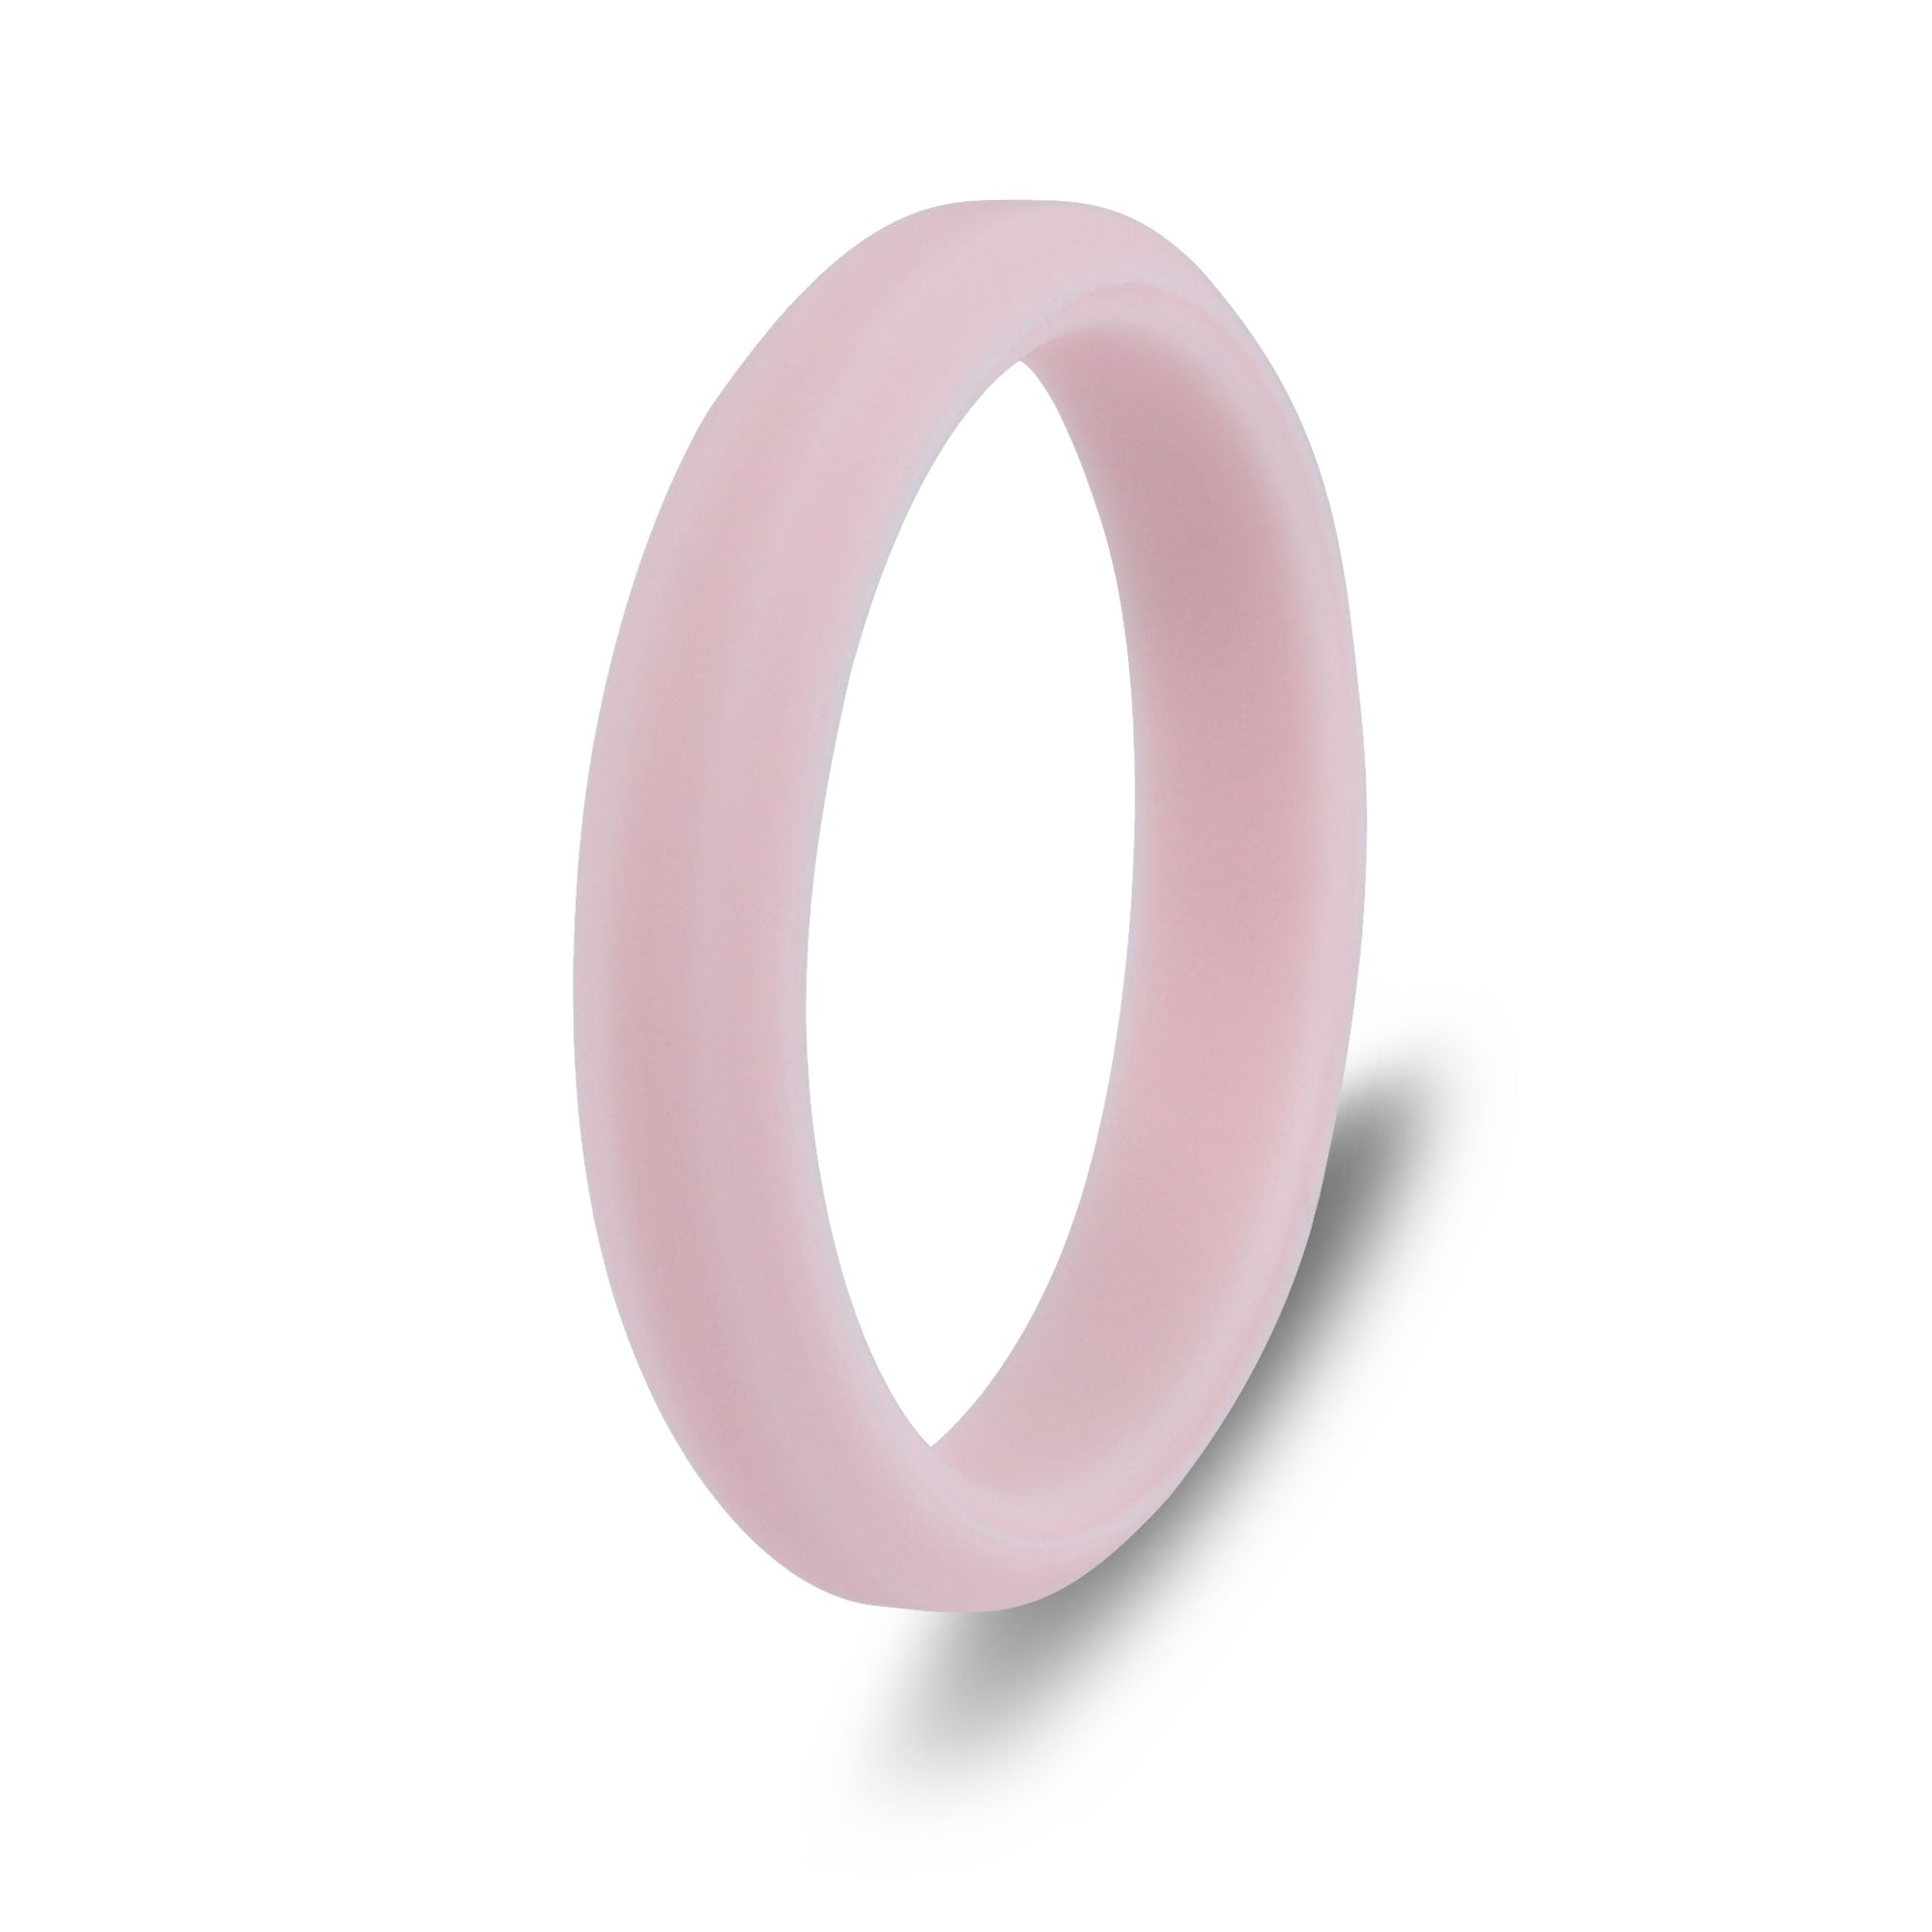 The Pale Rose - Silicone Ring